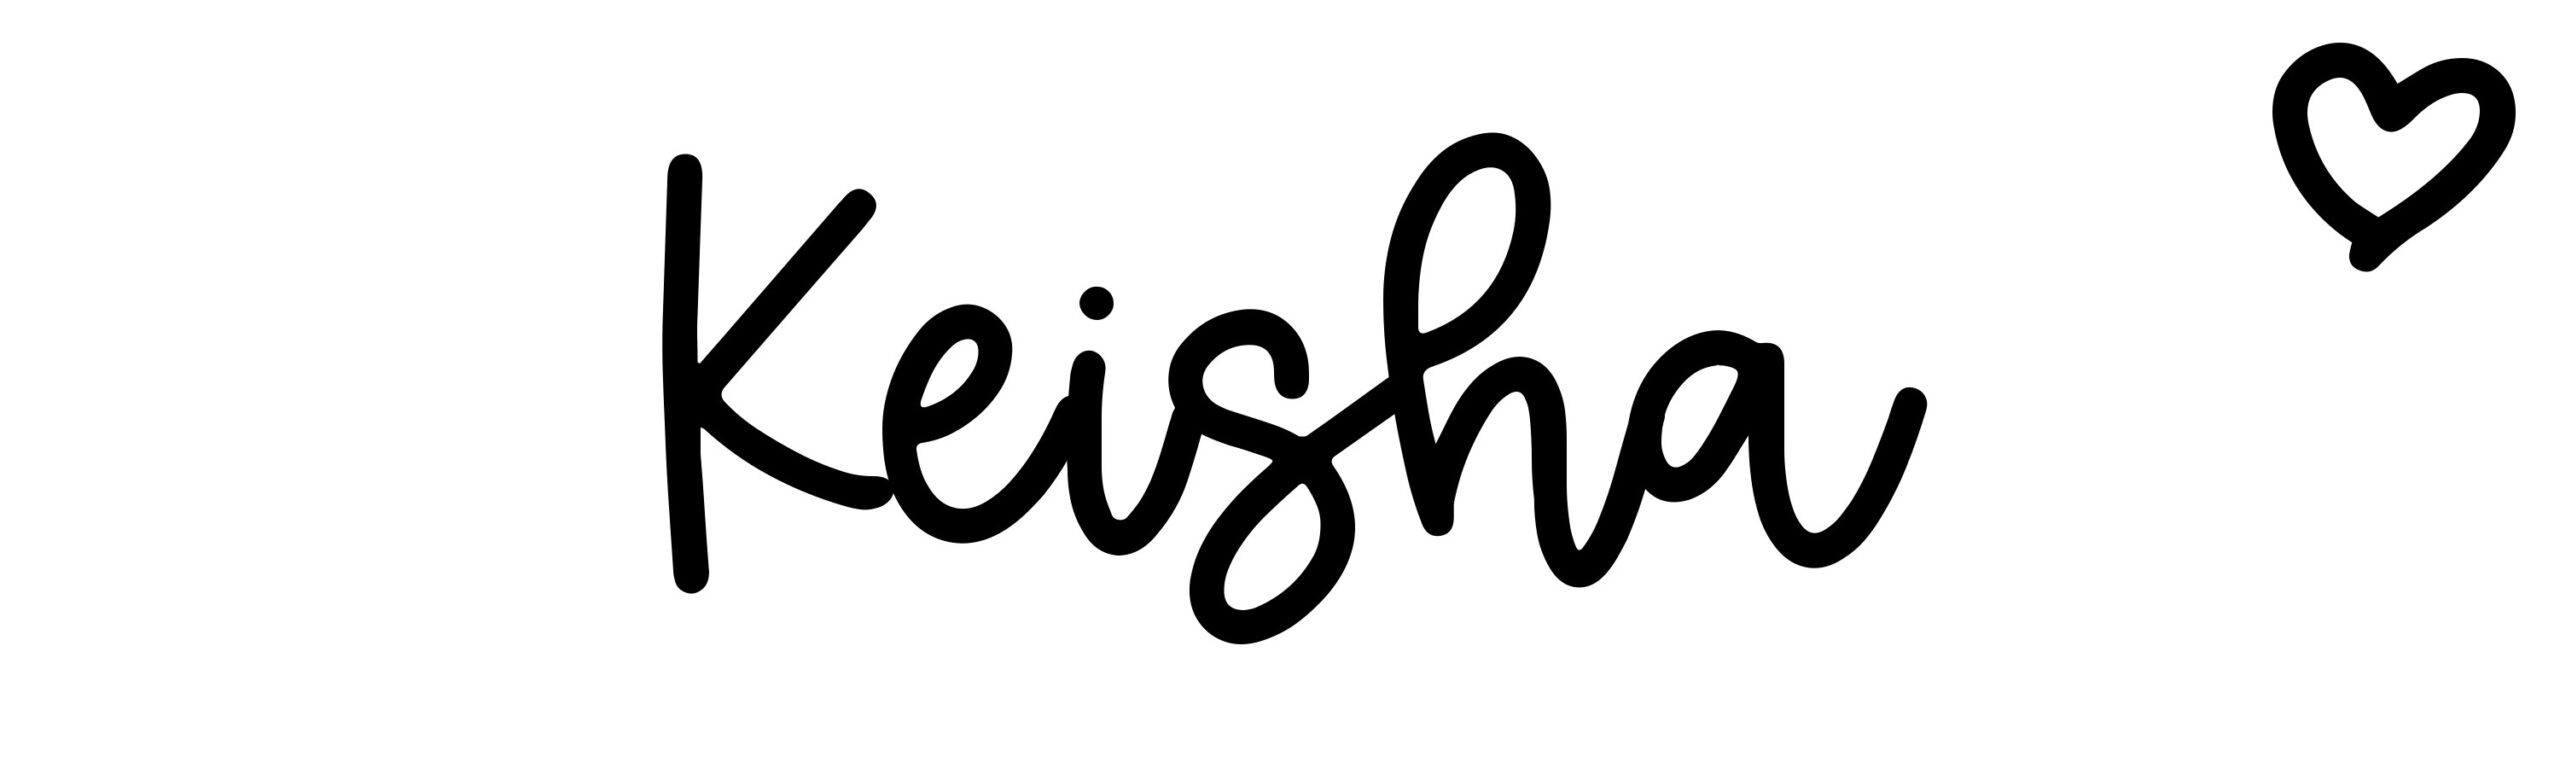 Keisha - Name meaning, origin, variations and more